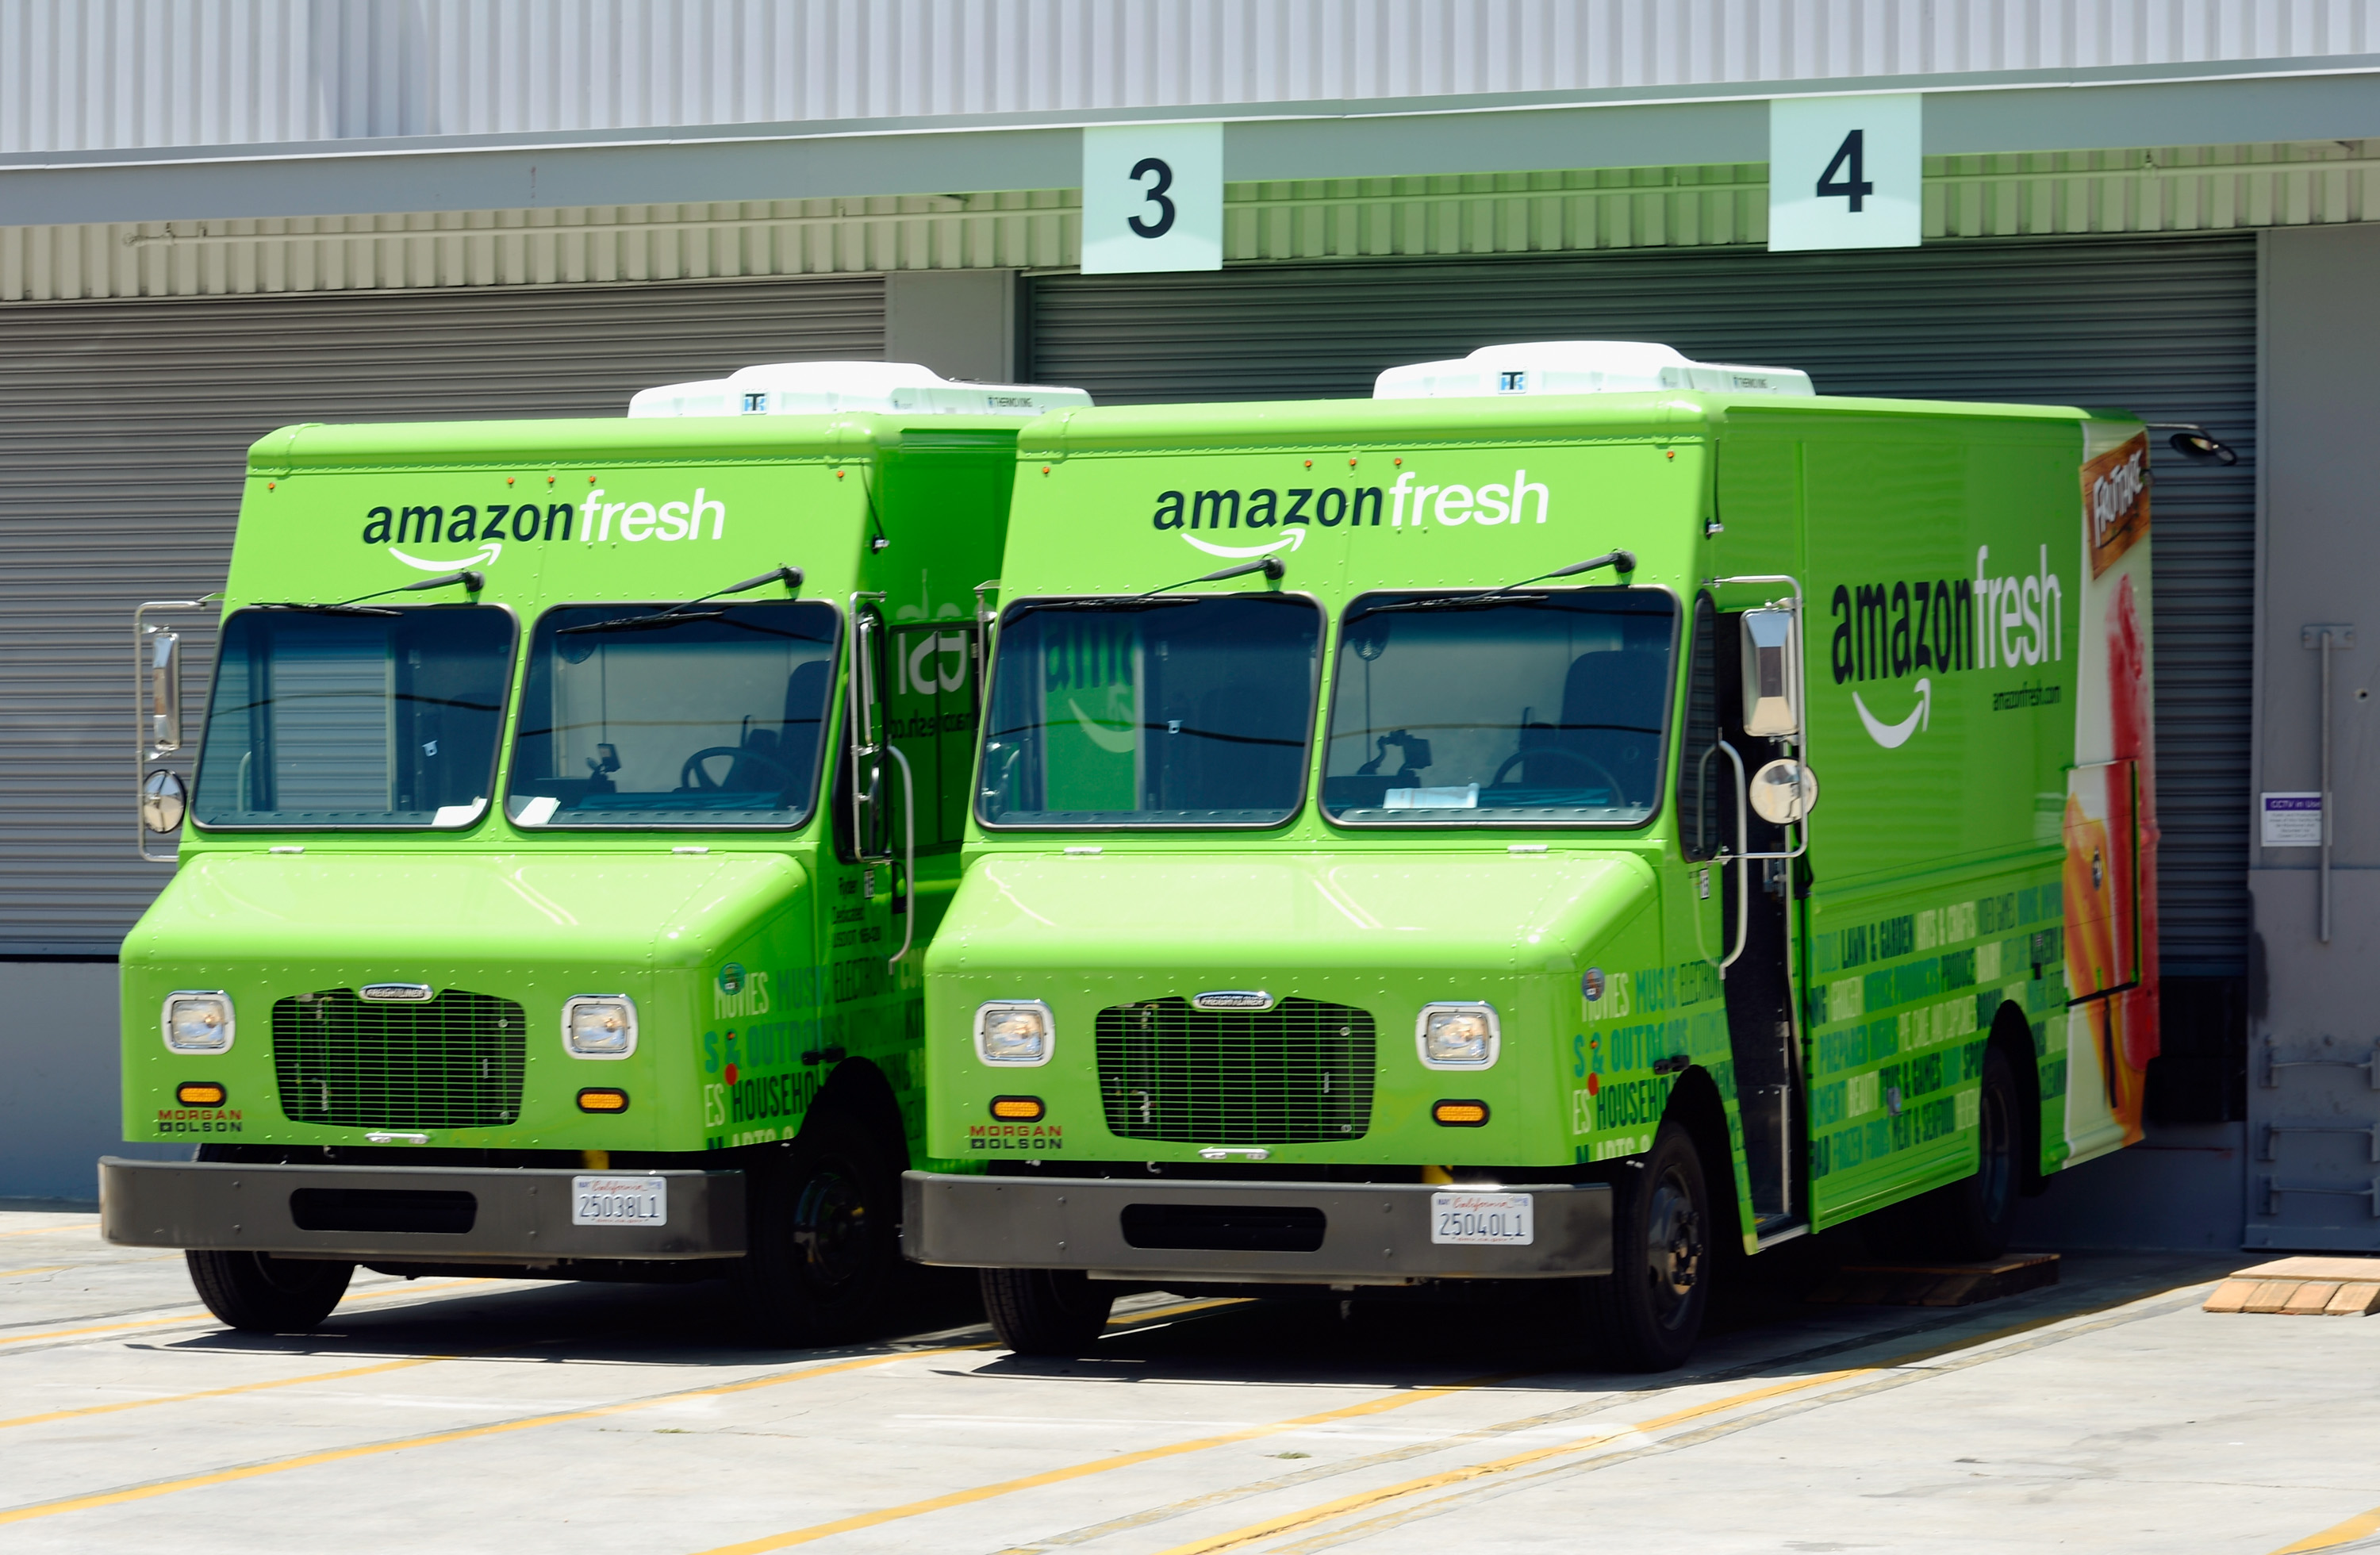 Amazon said to be exploring refrigeration-free prepared meal tech